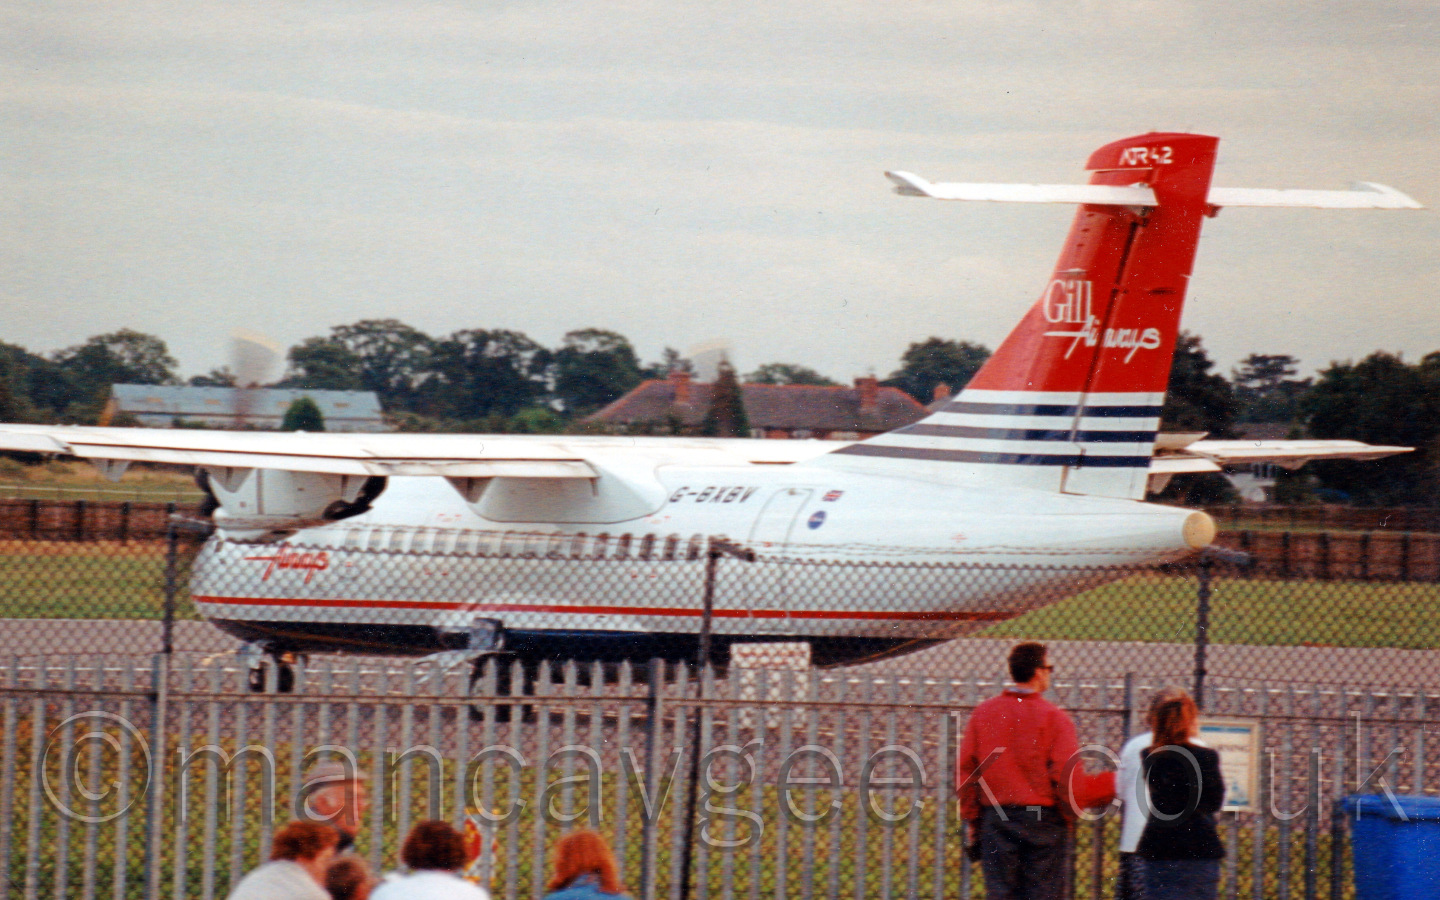 Rear view of a high-winged, T-tailed twin propellor-engined airliner taxiing from right to left and turning away from the camera. The body is mostly white, with a dark blue belly, and a thin red stripe running along the body. The tail is mostly red, with white and blue stripes at the base. There are white "Gill Airways" titles in the middle of the tail, with smaller white "ATR42" titles right at the top. In the foreground, several people are watching through a chain-link fence, while in the background, houses and other buildings are nestled in trees, under a grey sky.